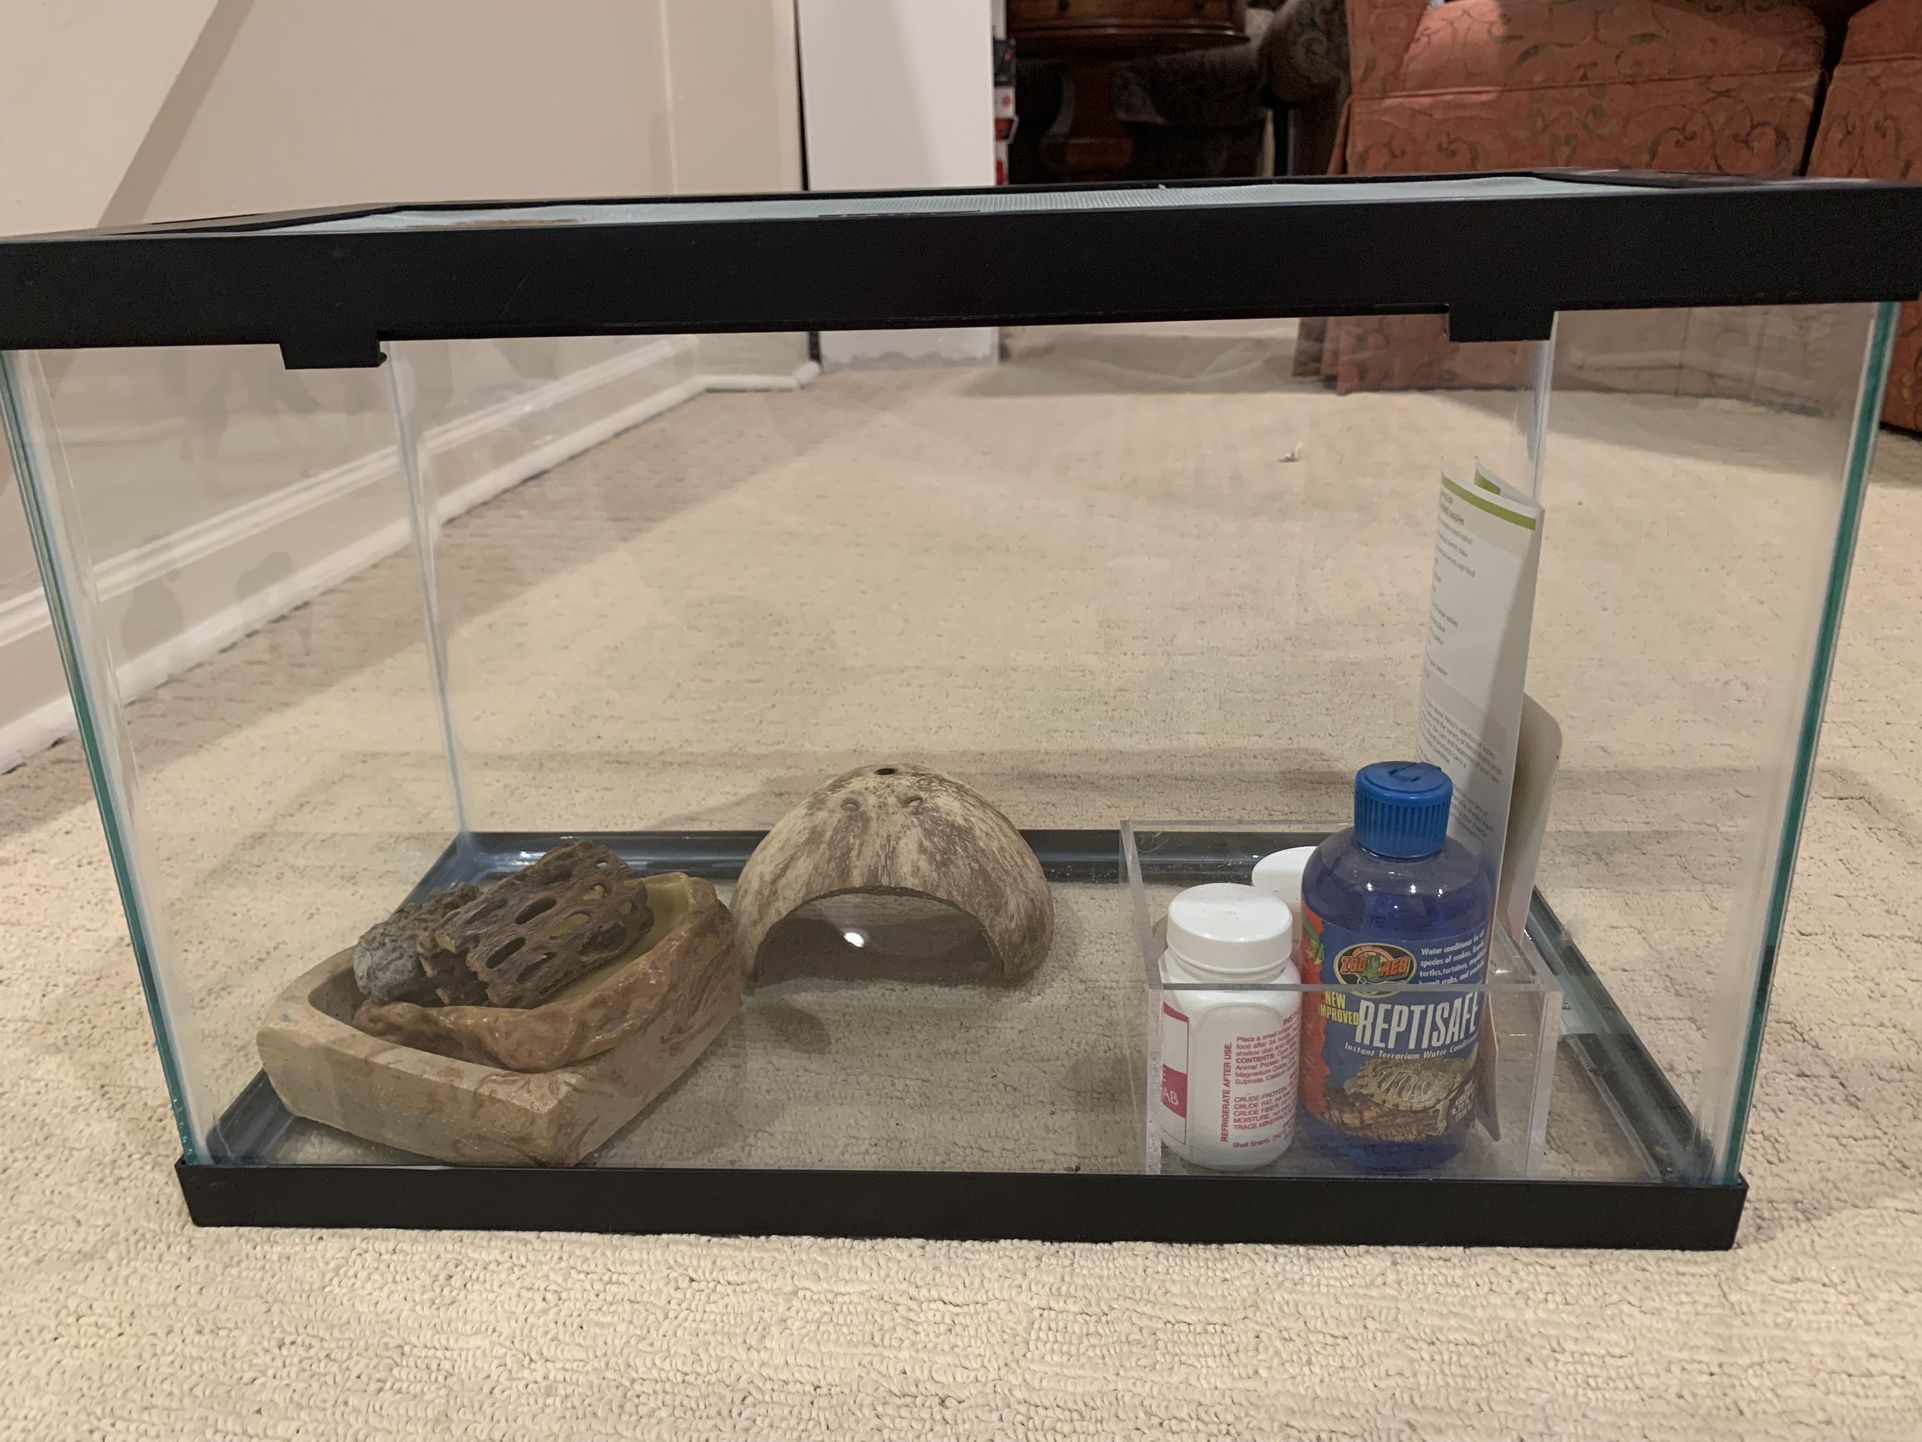 10 gallon reptile or fish tank, comes with bowls, accessories and food